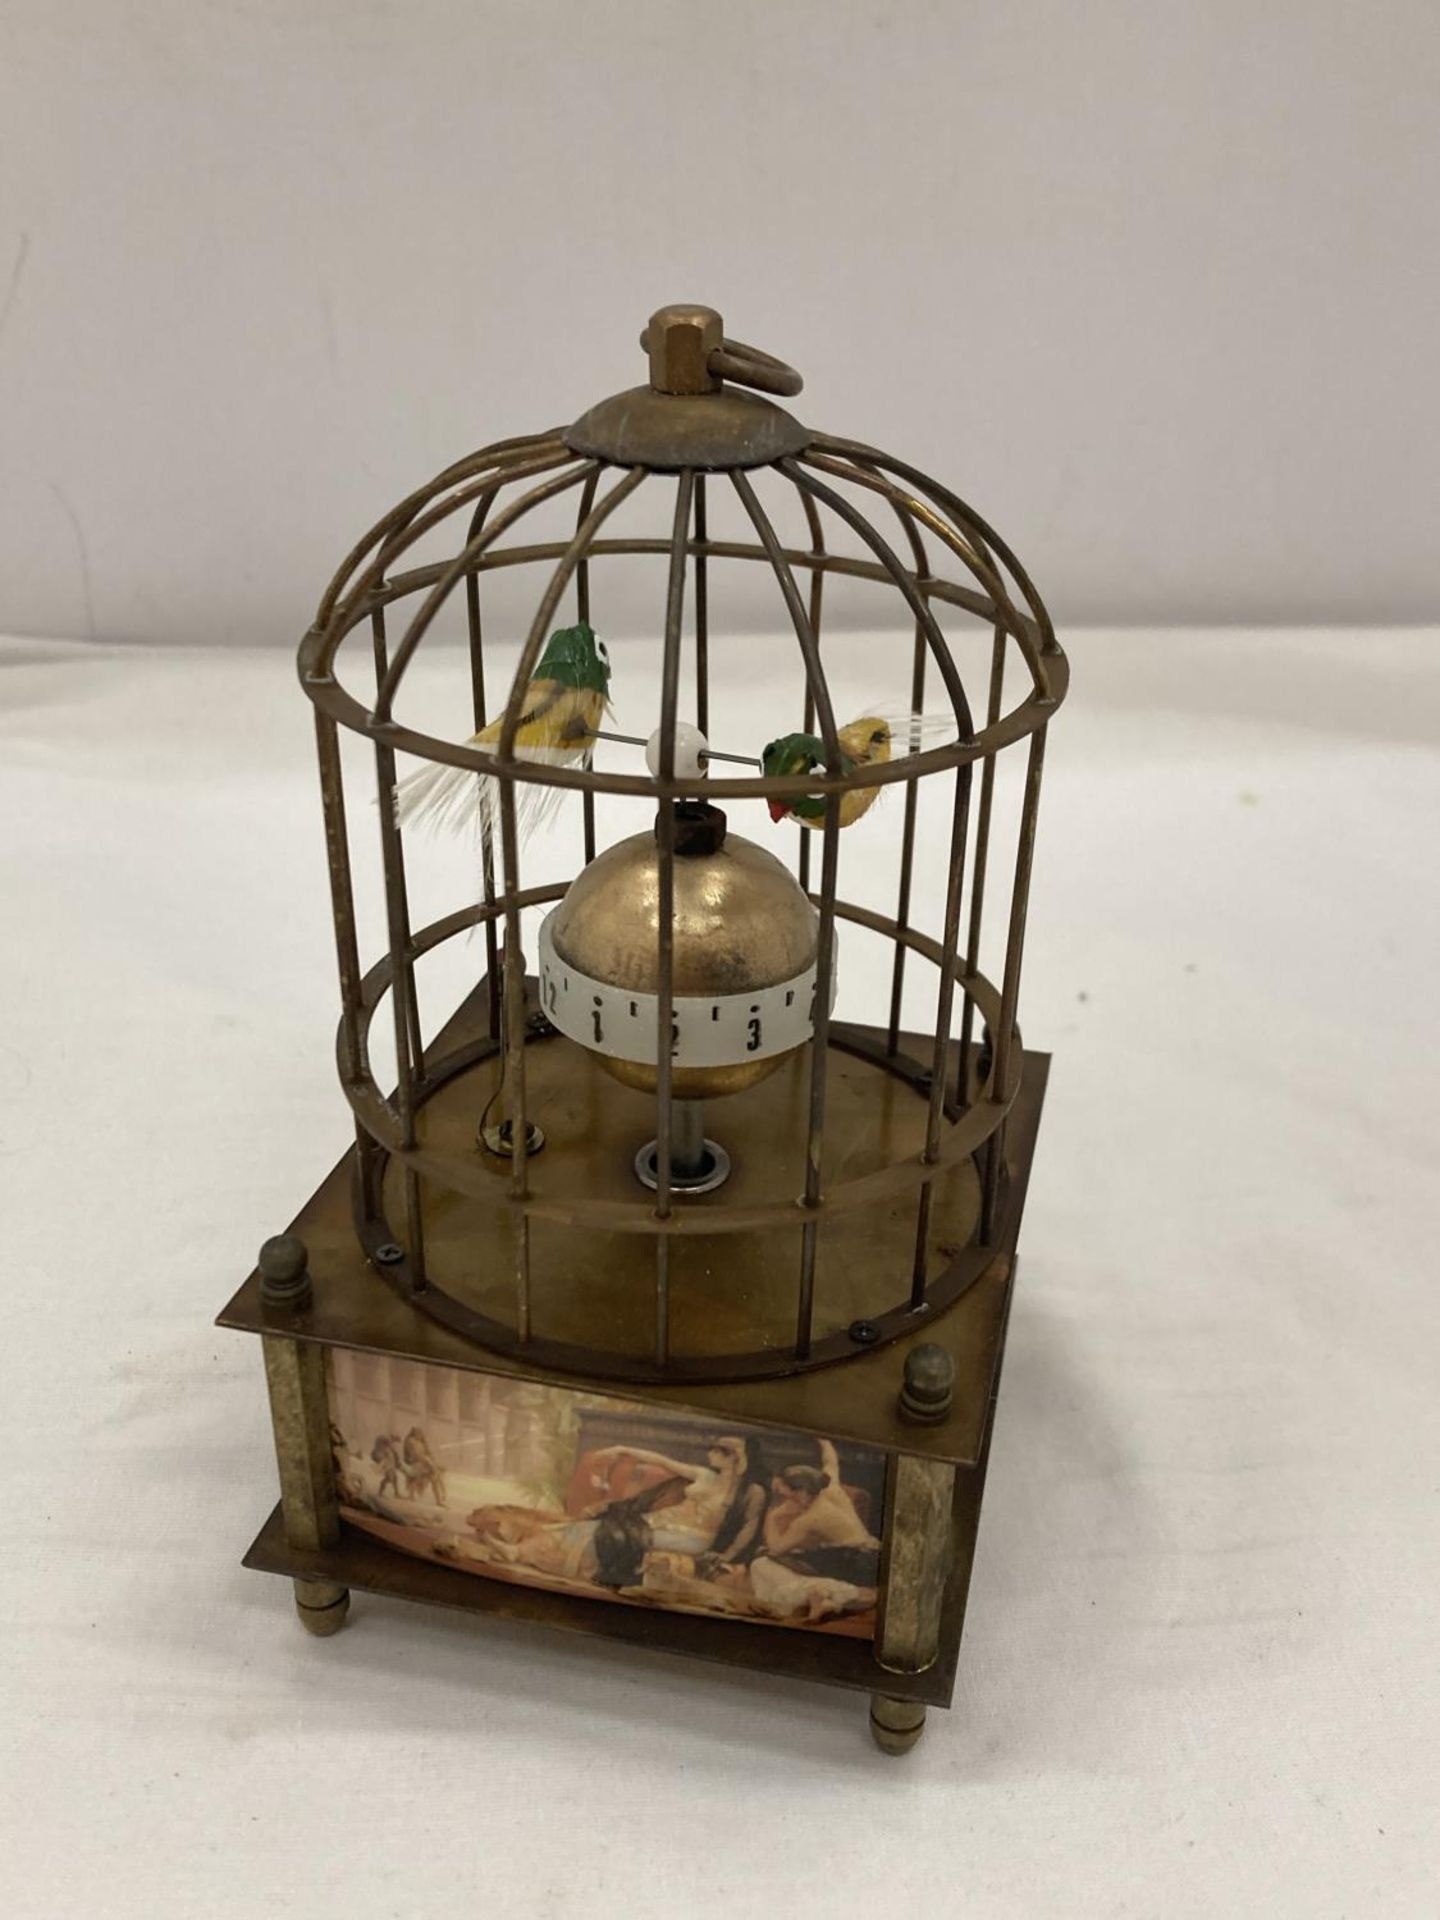 A BRASS MECHANICAL BIRD CAGE CLOCK SEEN WORKING BUT NO WARRANTY - Image 4 of 4